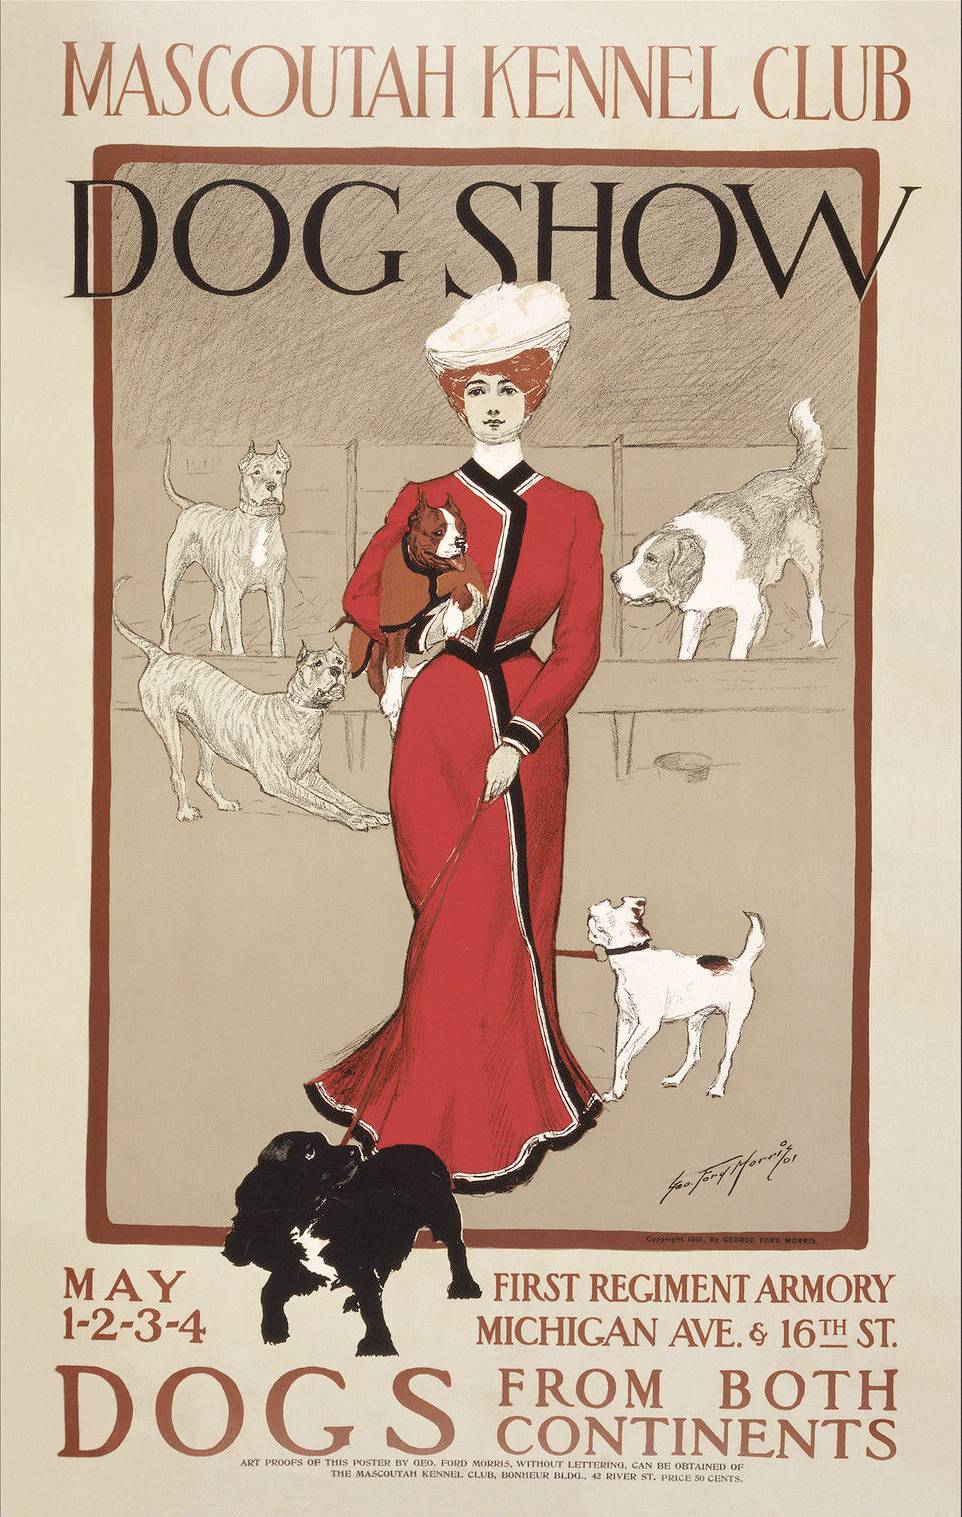 POSTER - CHICAGO - MASCOUTAH KENNEL CLUB DOG SHOW - FIRST REGIMENT ARMORY - MICHIGAN AND 16TH - FROM BOTH CONTINENTS - 1901